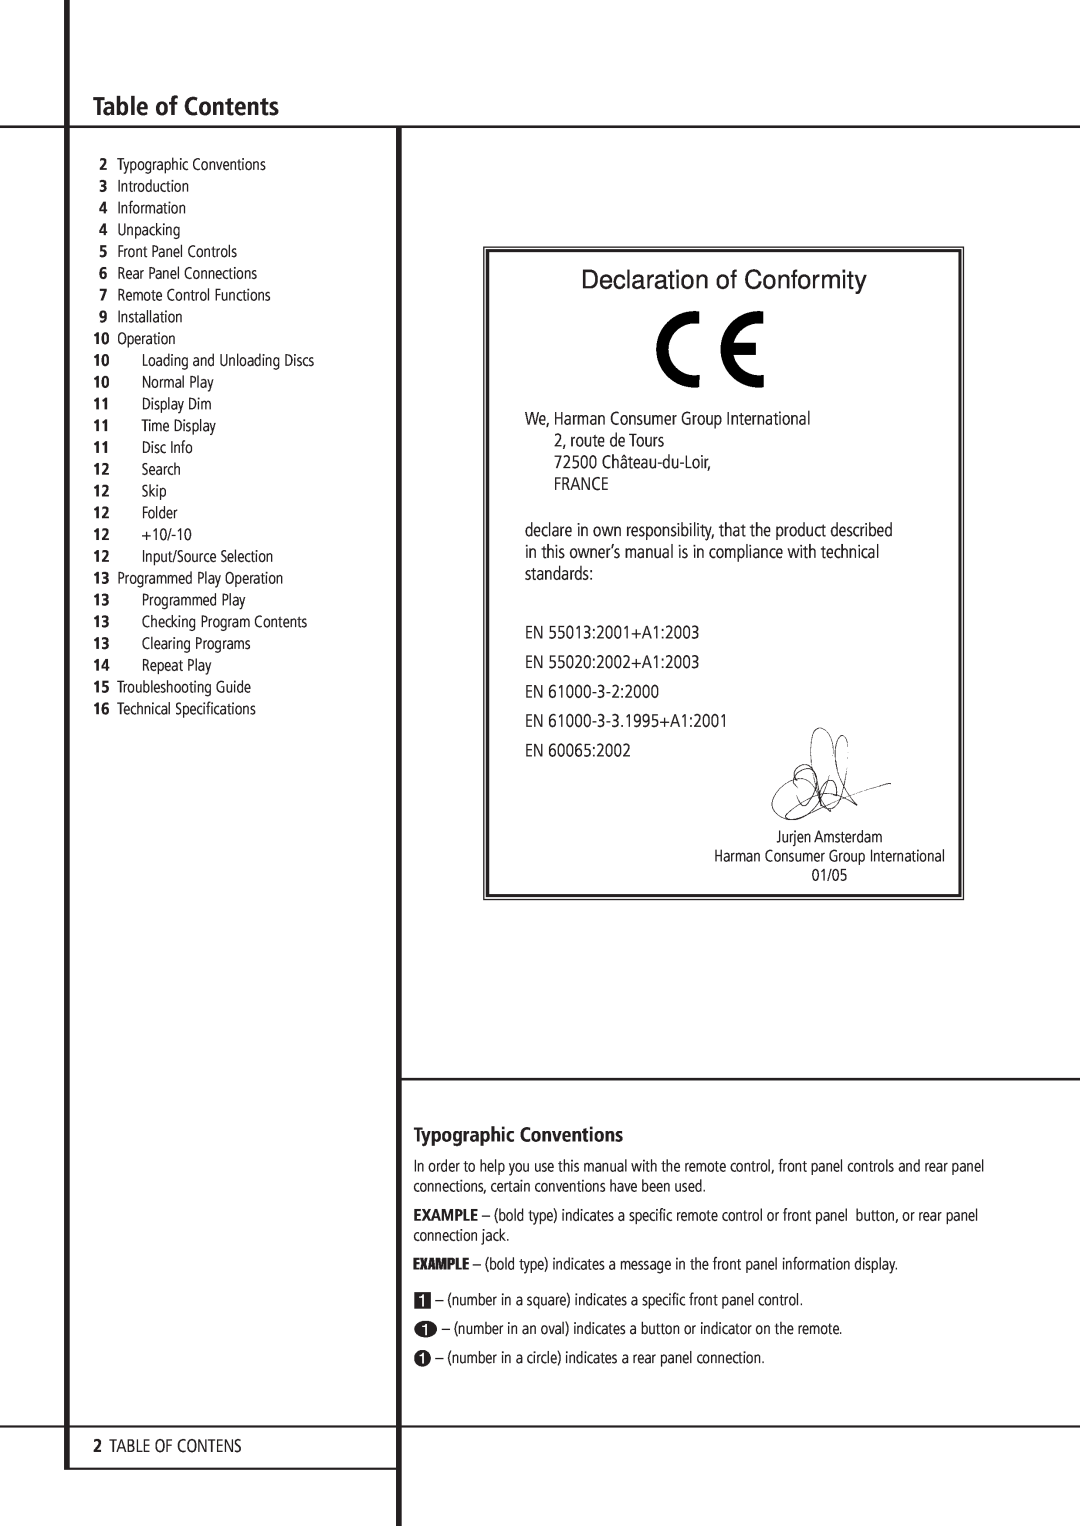 Harman-Kardon HD 970 owner manual Table of Contents, Typographic Conventions, Declaration of Conformity 